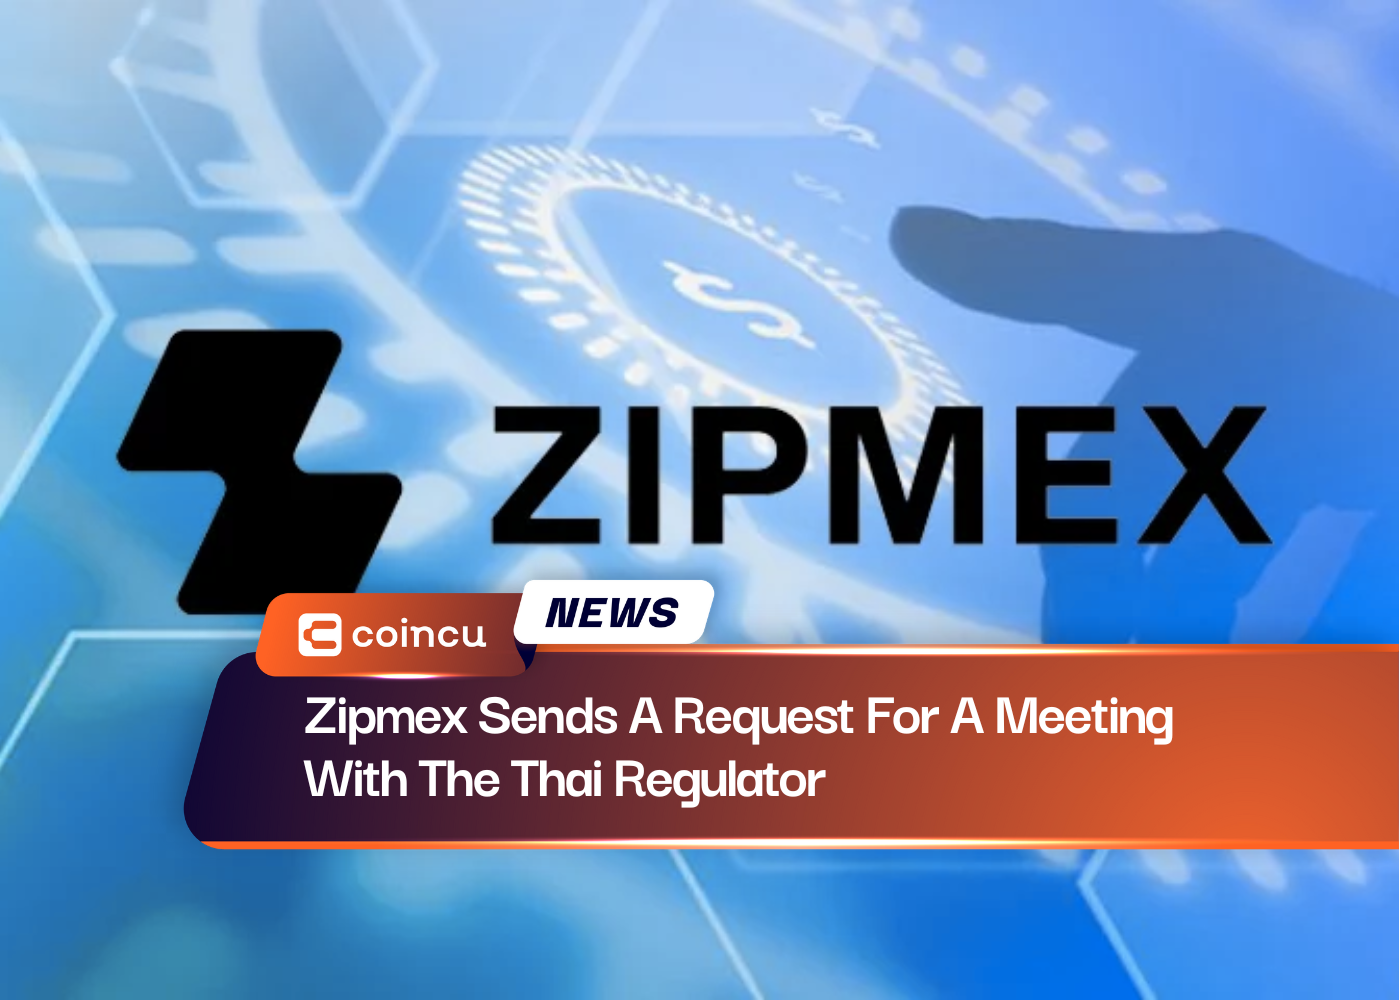 Zipmex Sends A Request For A Meeting With The Thai Regulator